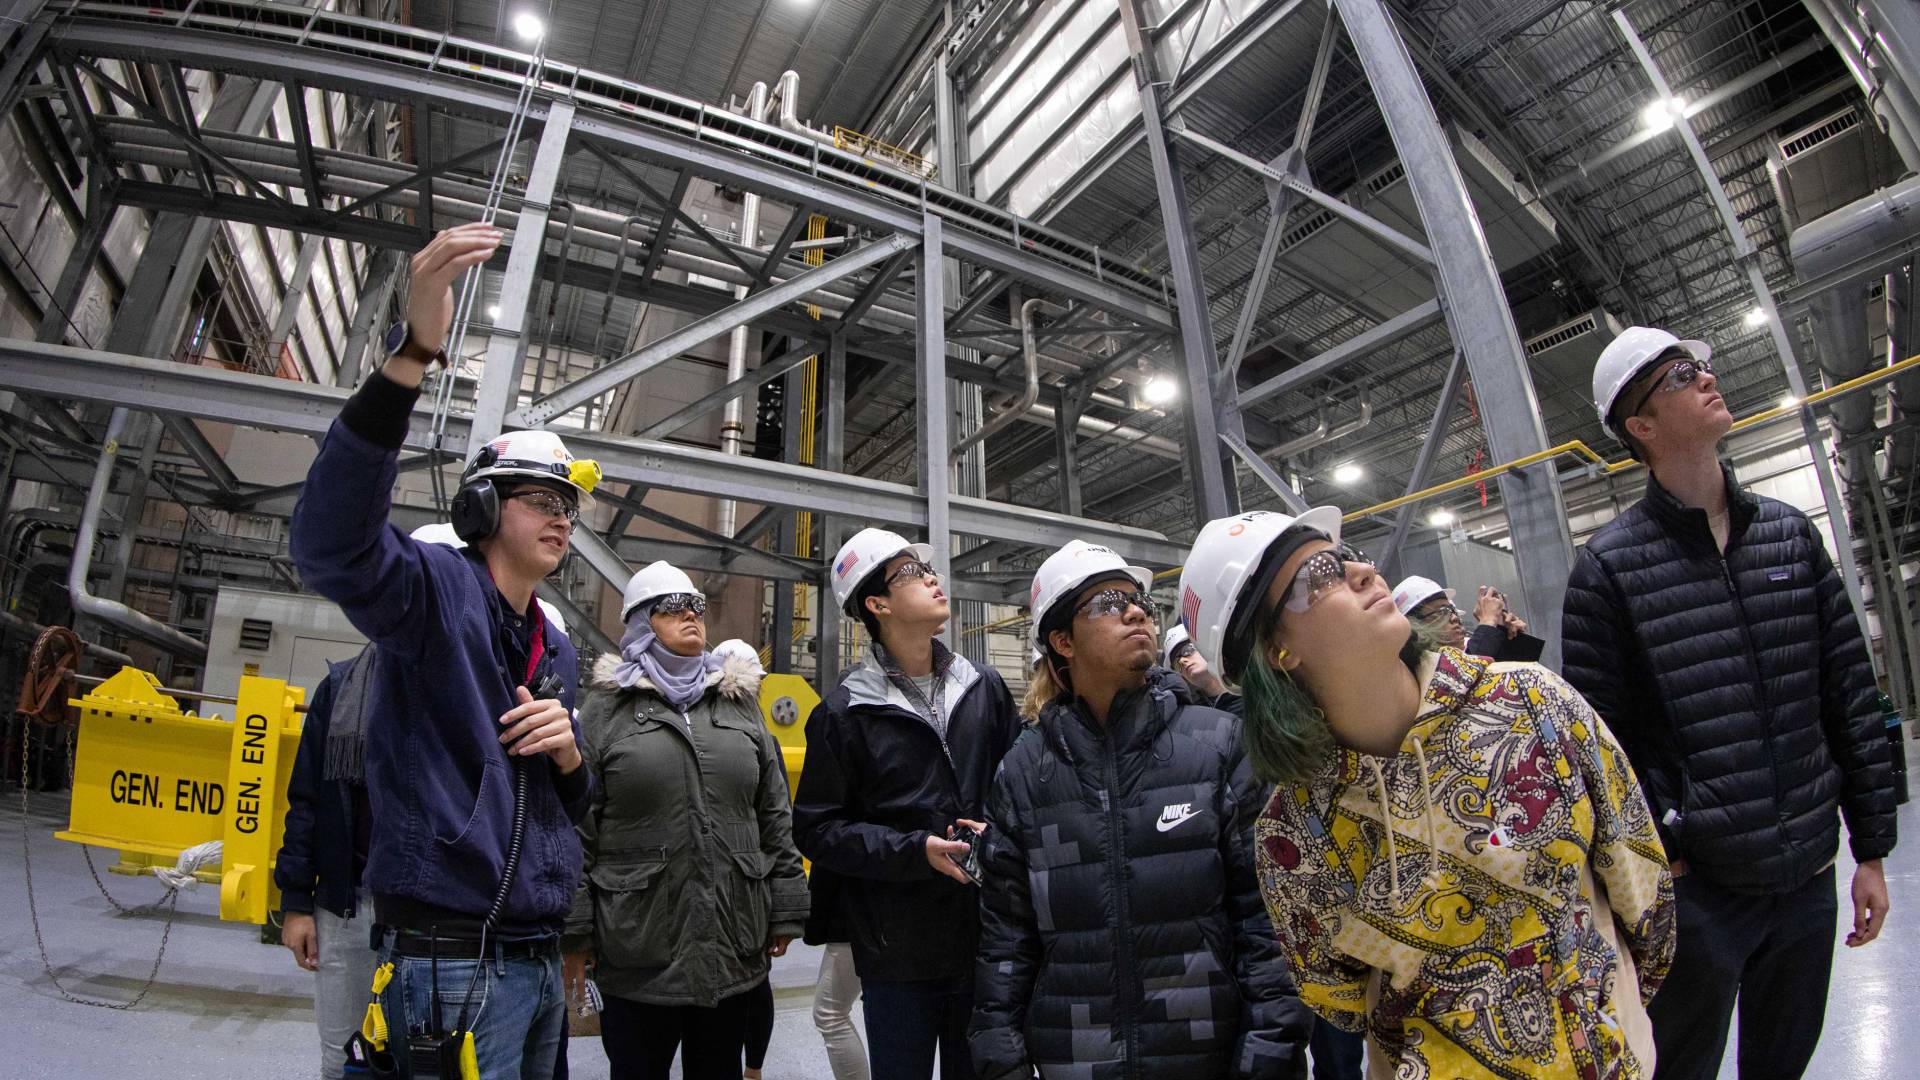 Students look up during a tour of a power plant